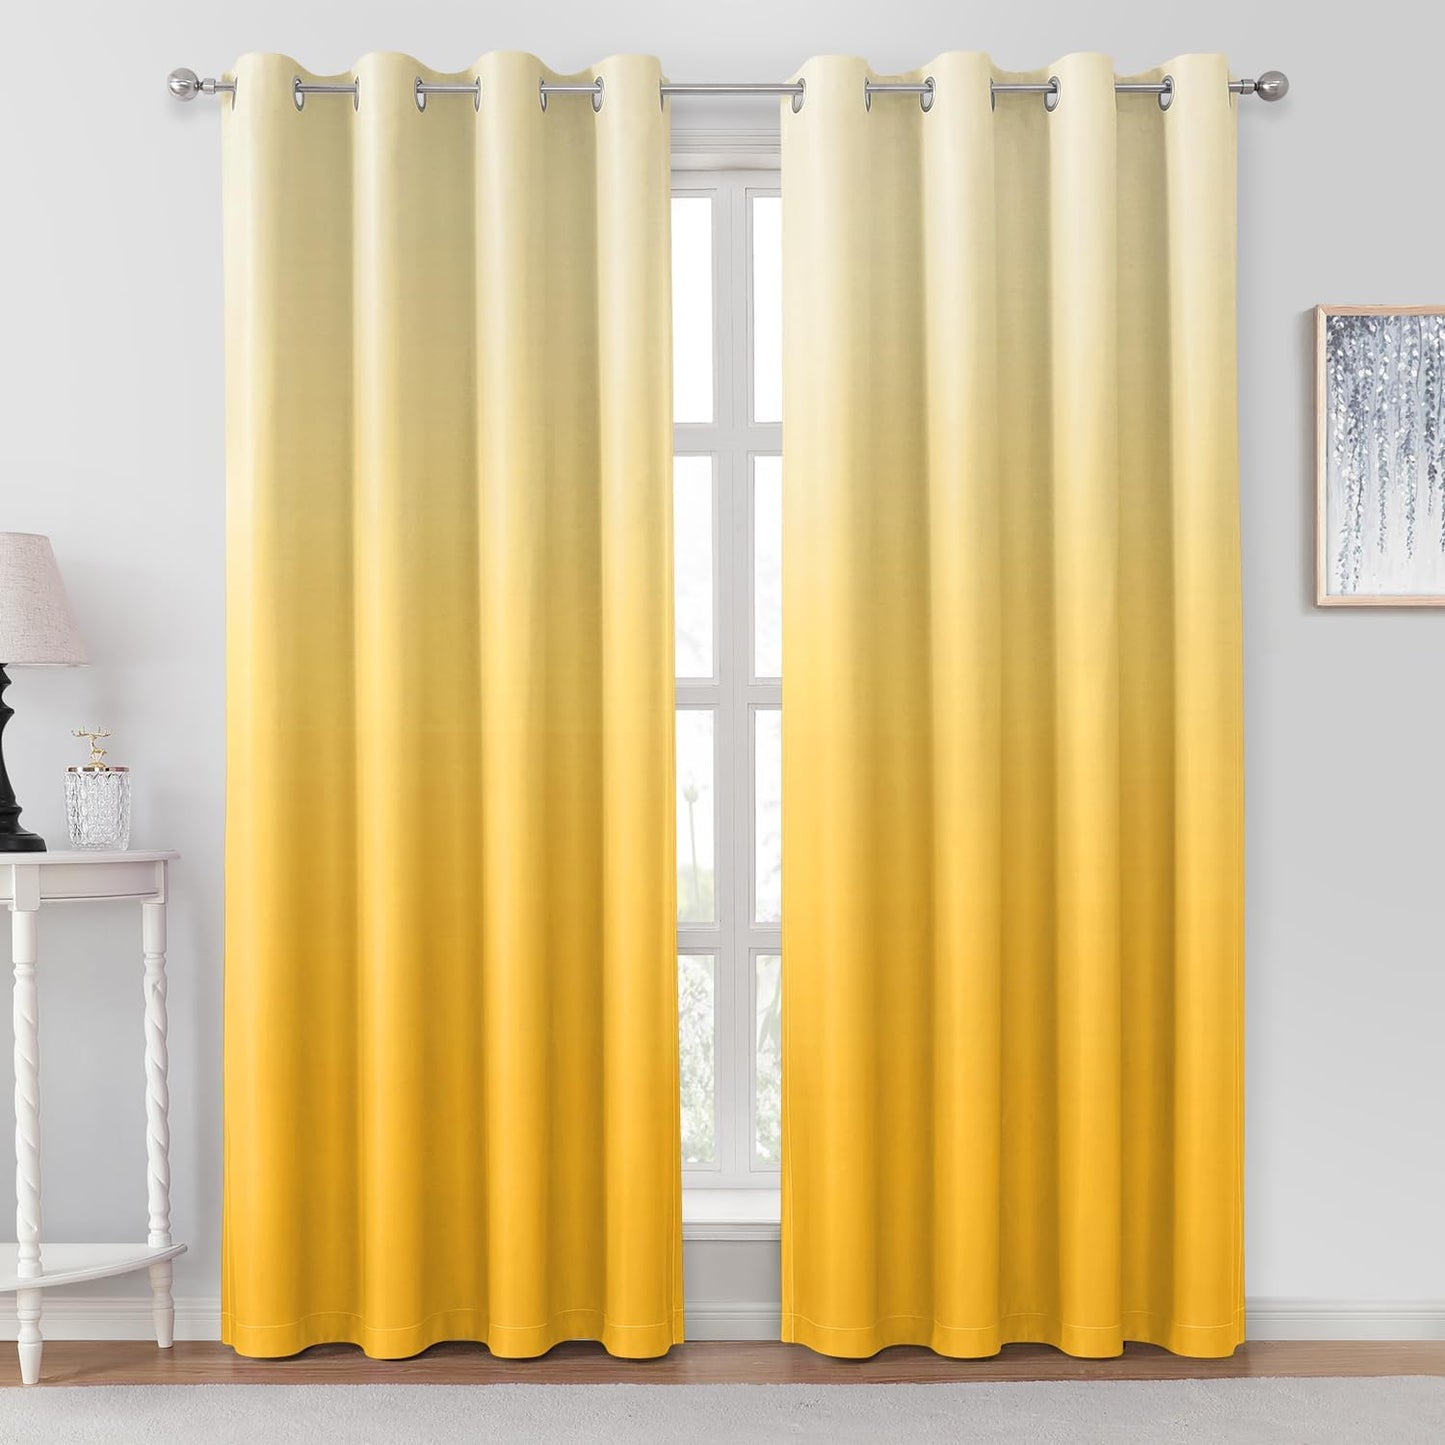 HOMEIDEAS Navy Blue Ombre Blackout Curtains 52 X 84 Inch Length Gradient Room Darkening Thermal Insulated Energy Saving Grommet 2 Panels Window Drapes for Living Room/Bedroom  HOMEIDEAS Yellow 52"W X 96"L 